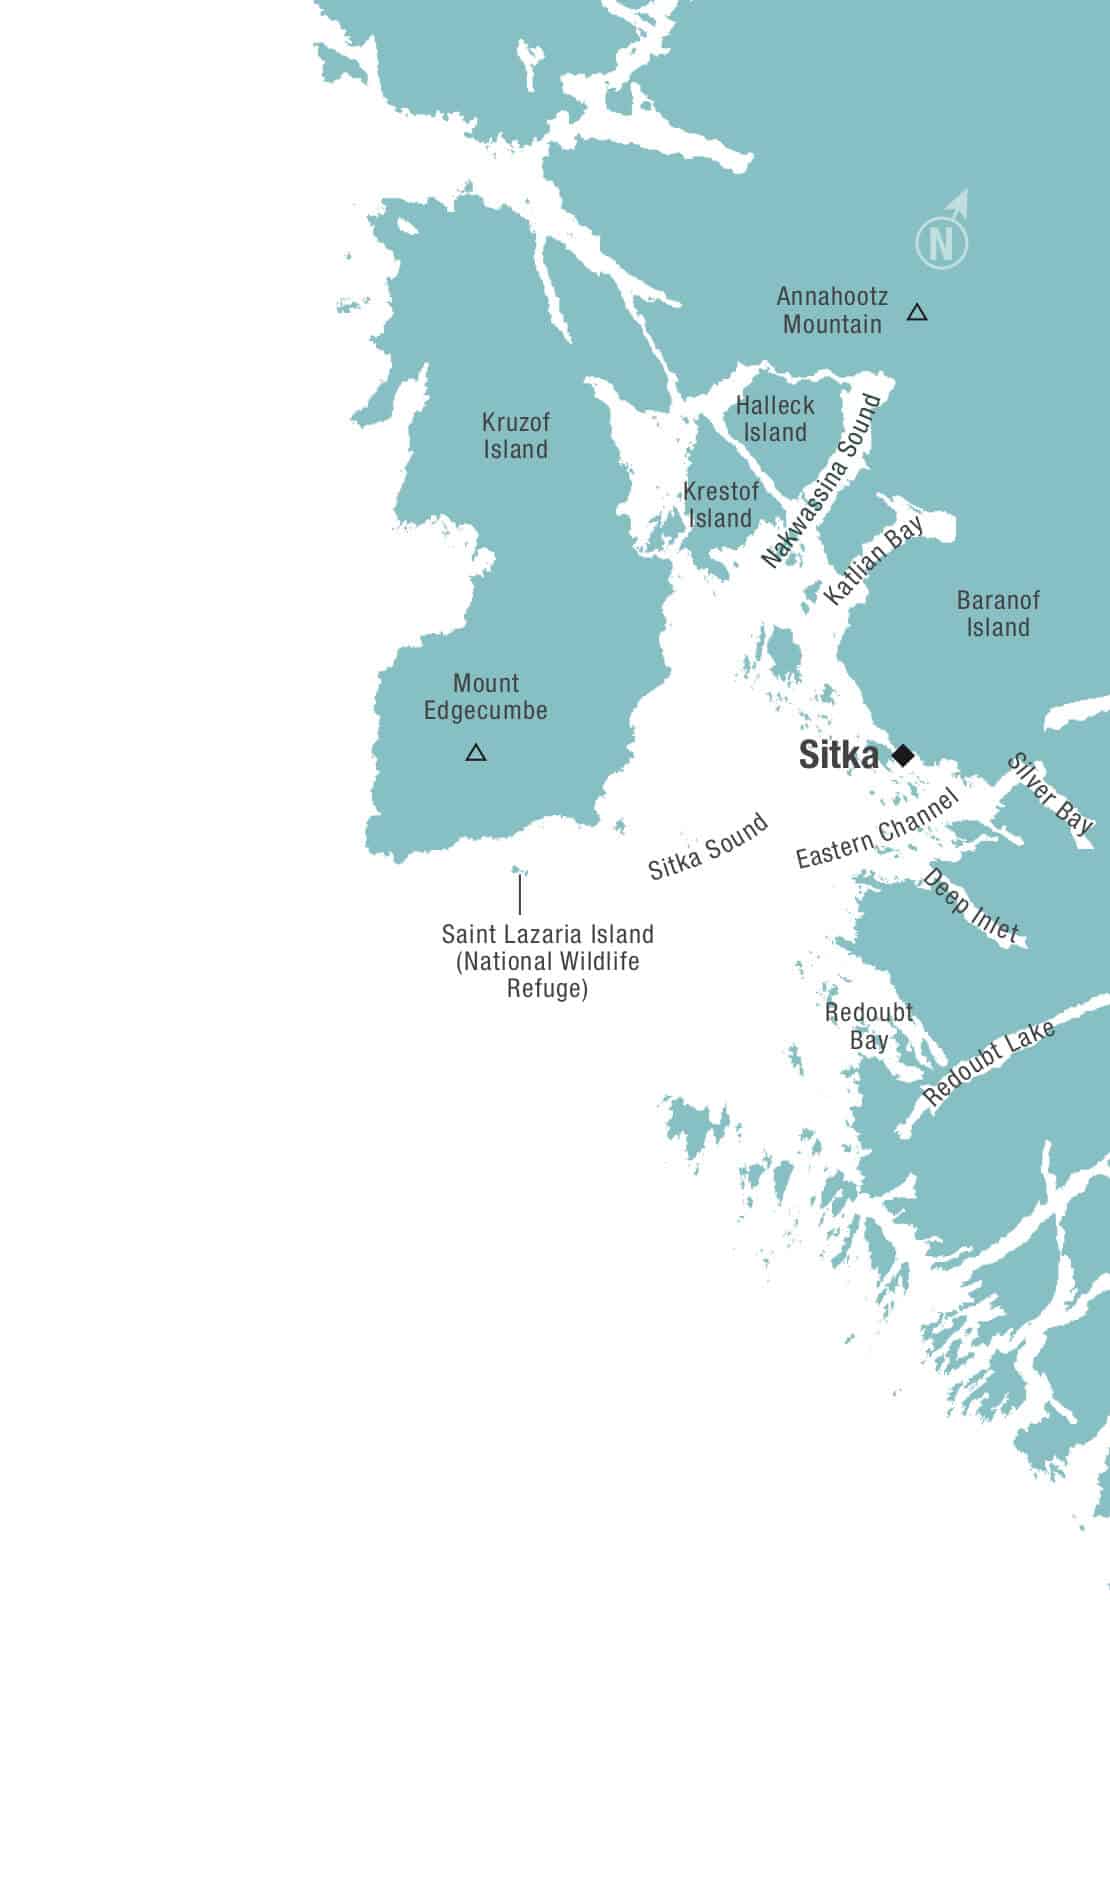 Route map of Alaska's Spring Wilderness and Wildlife Safari in the Sitka Sound of Alaska